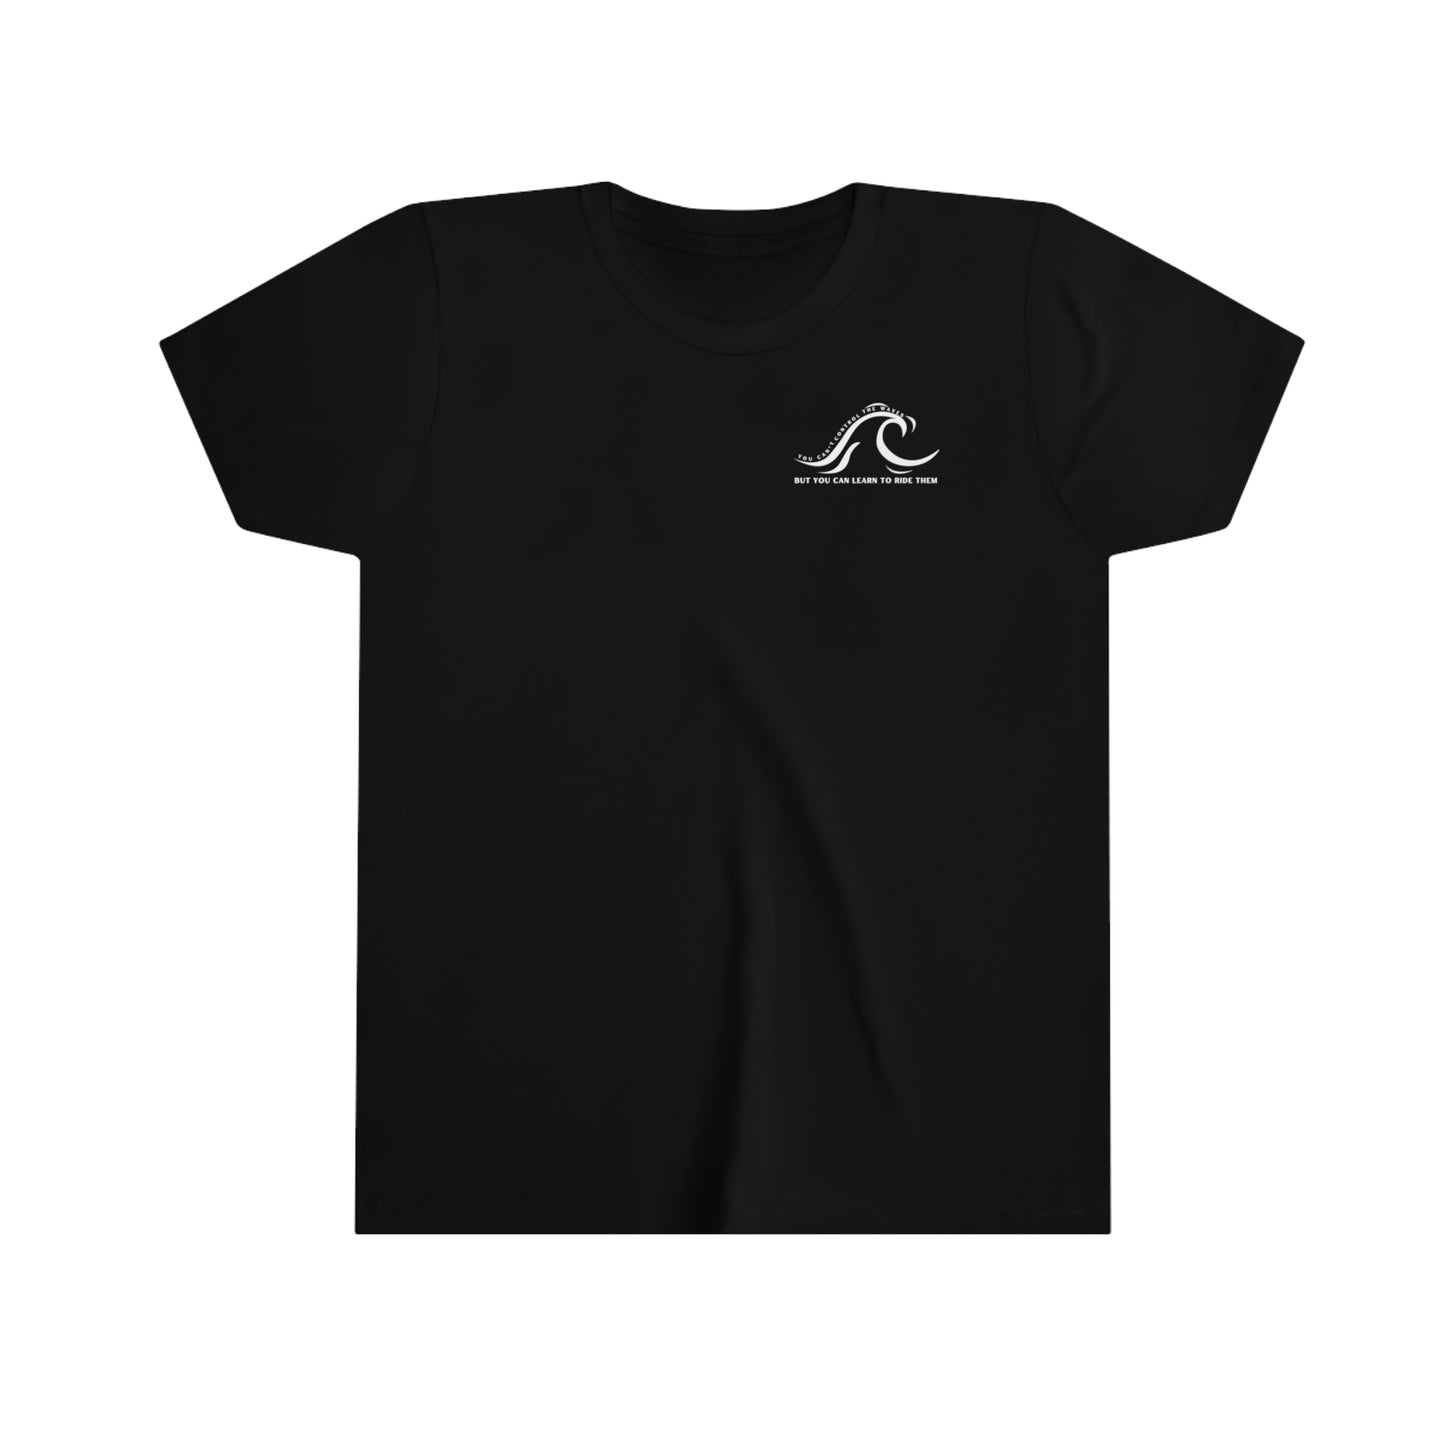 Ride the Waves Youth Tee